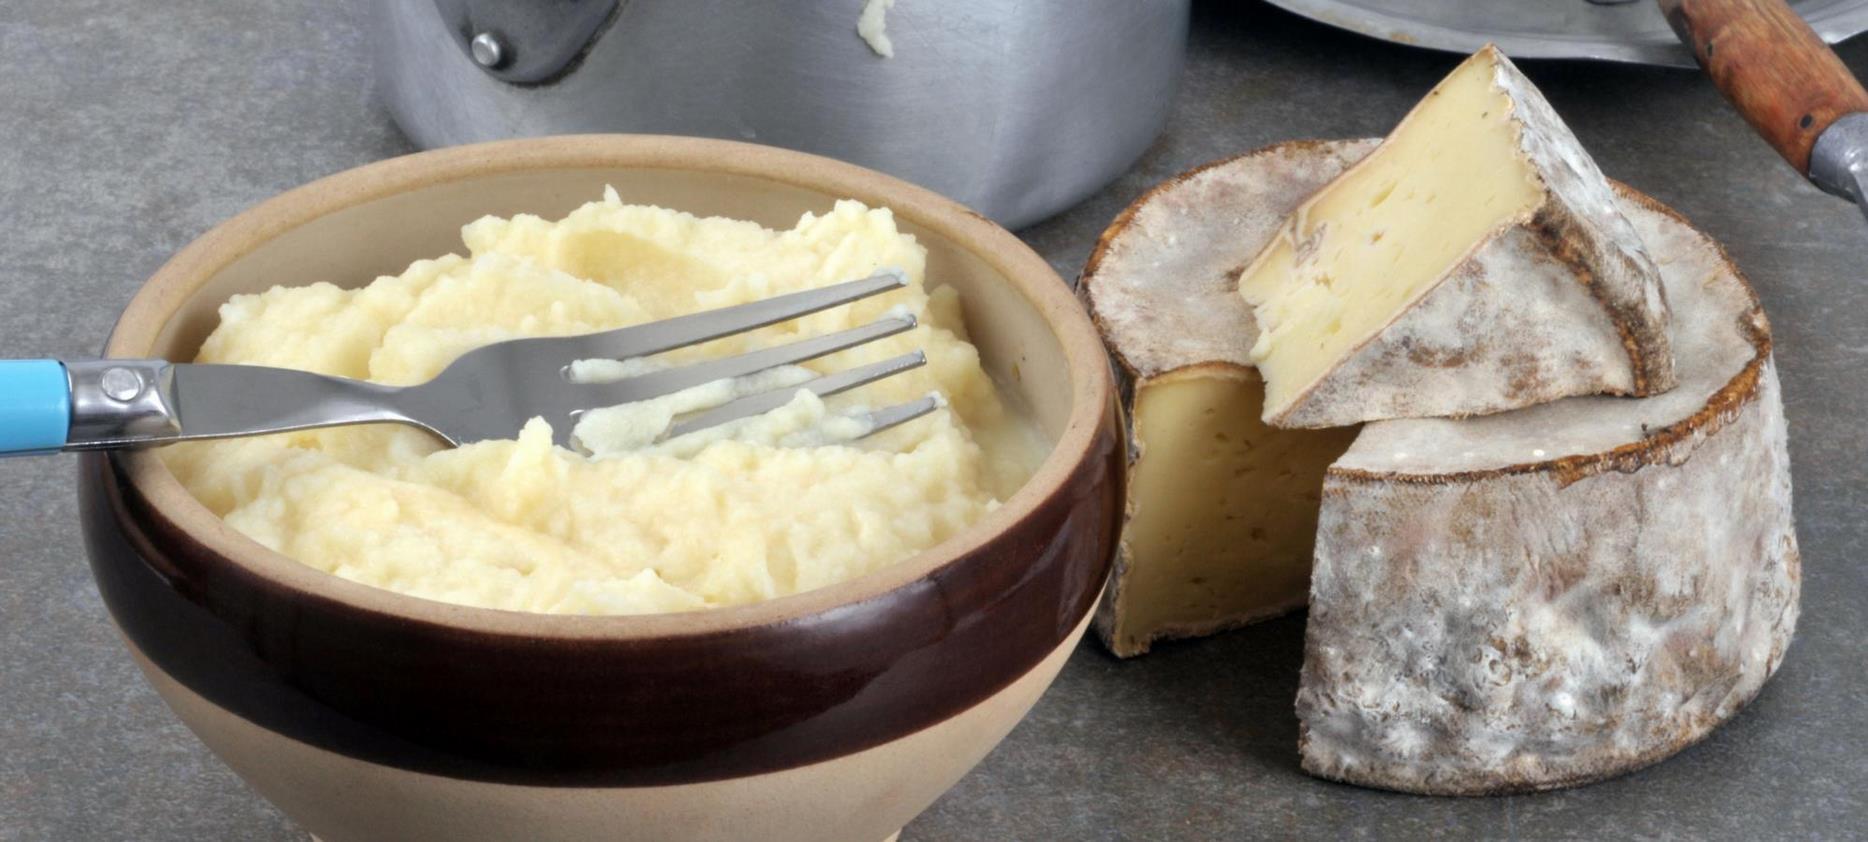 The Truffade dish made from Potato and cheese